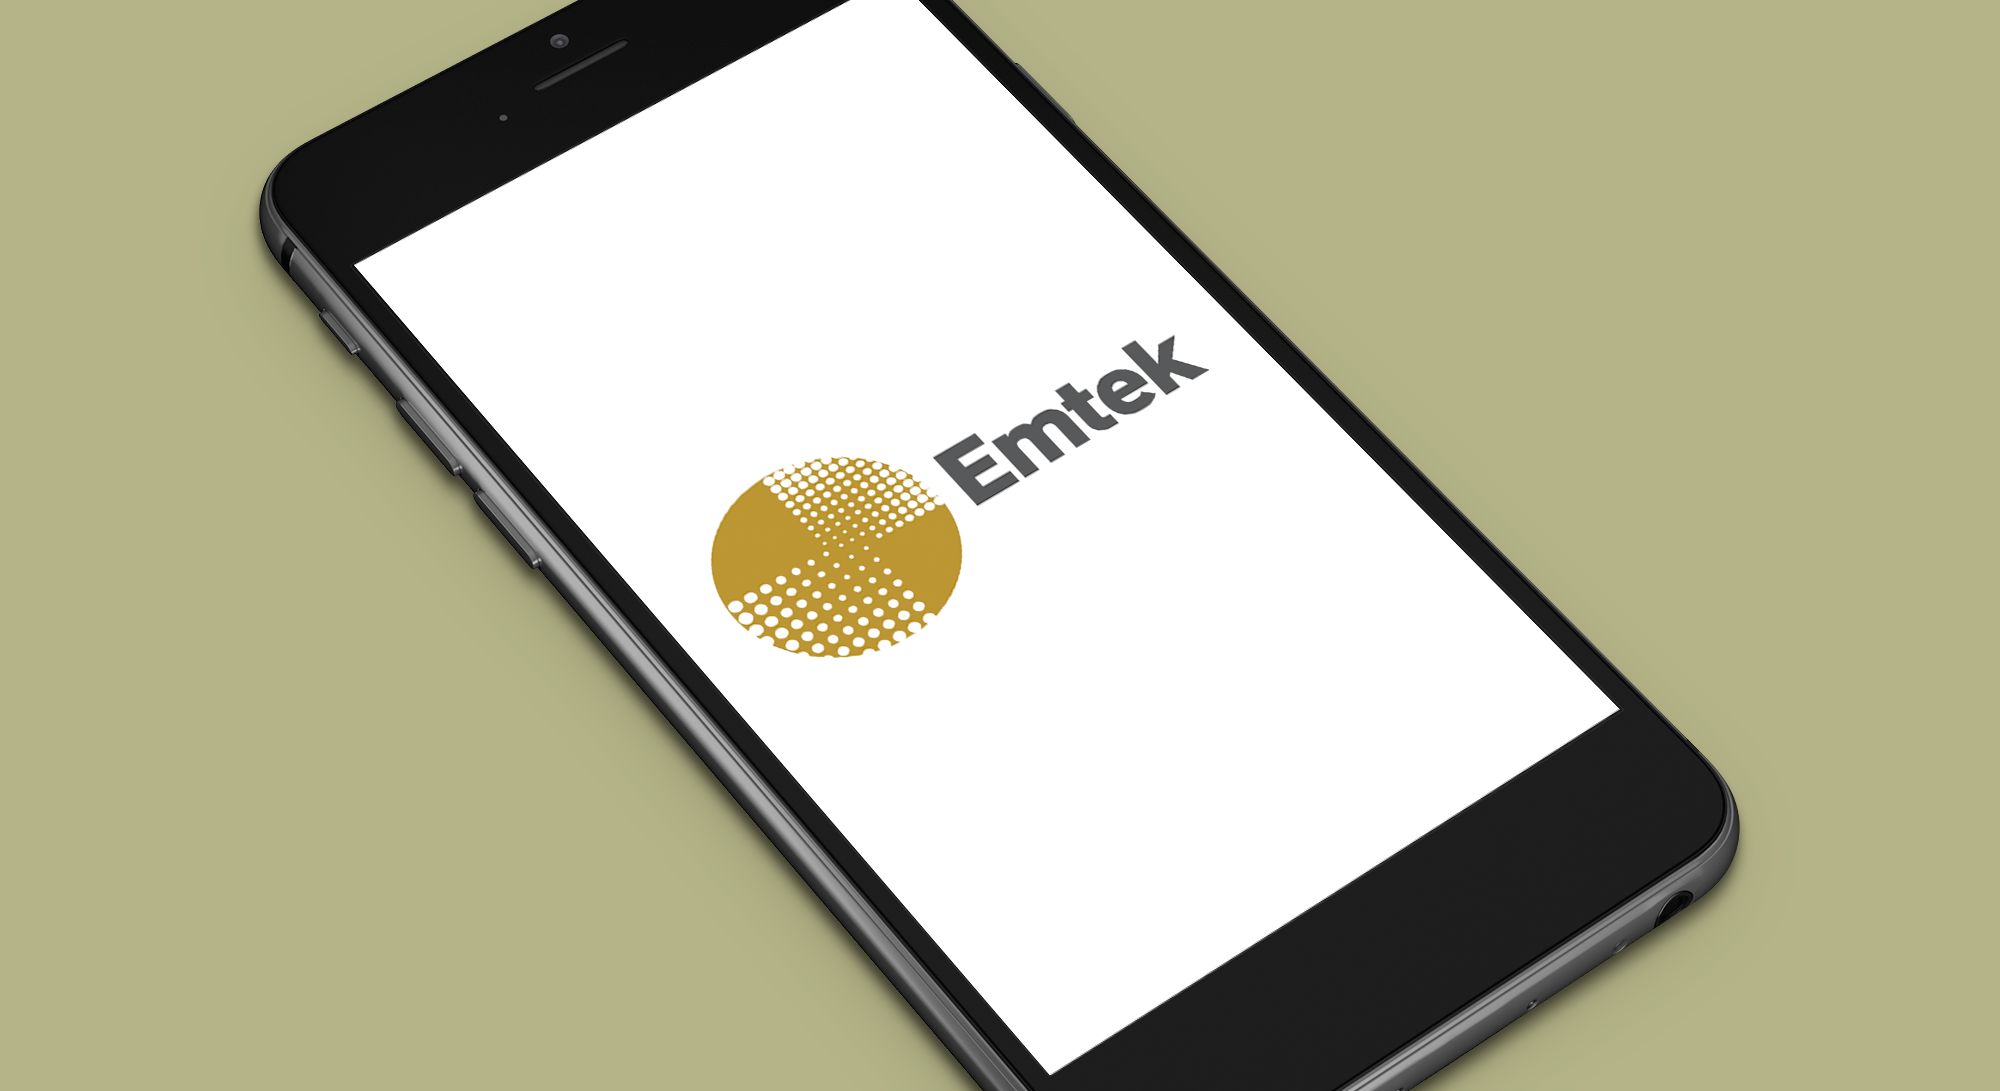 Indonesian conglomerate Emtek picks up stake in payments unicorn Nium